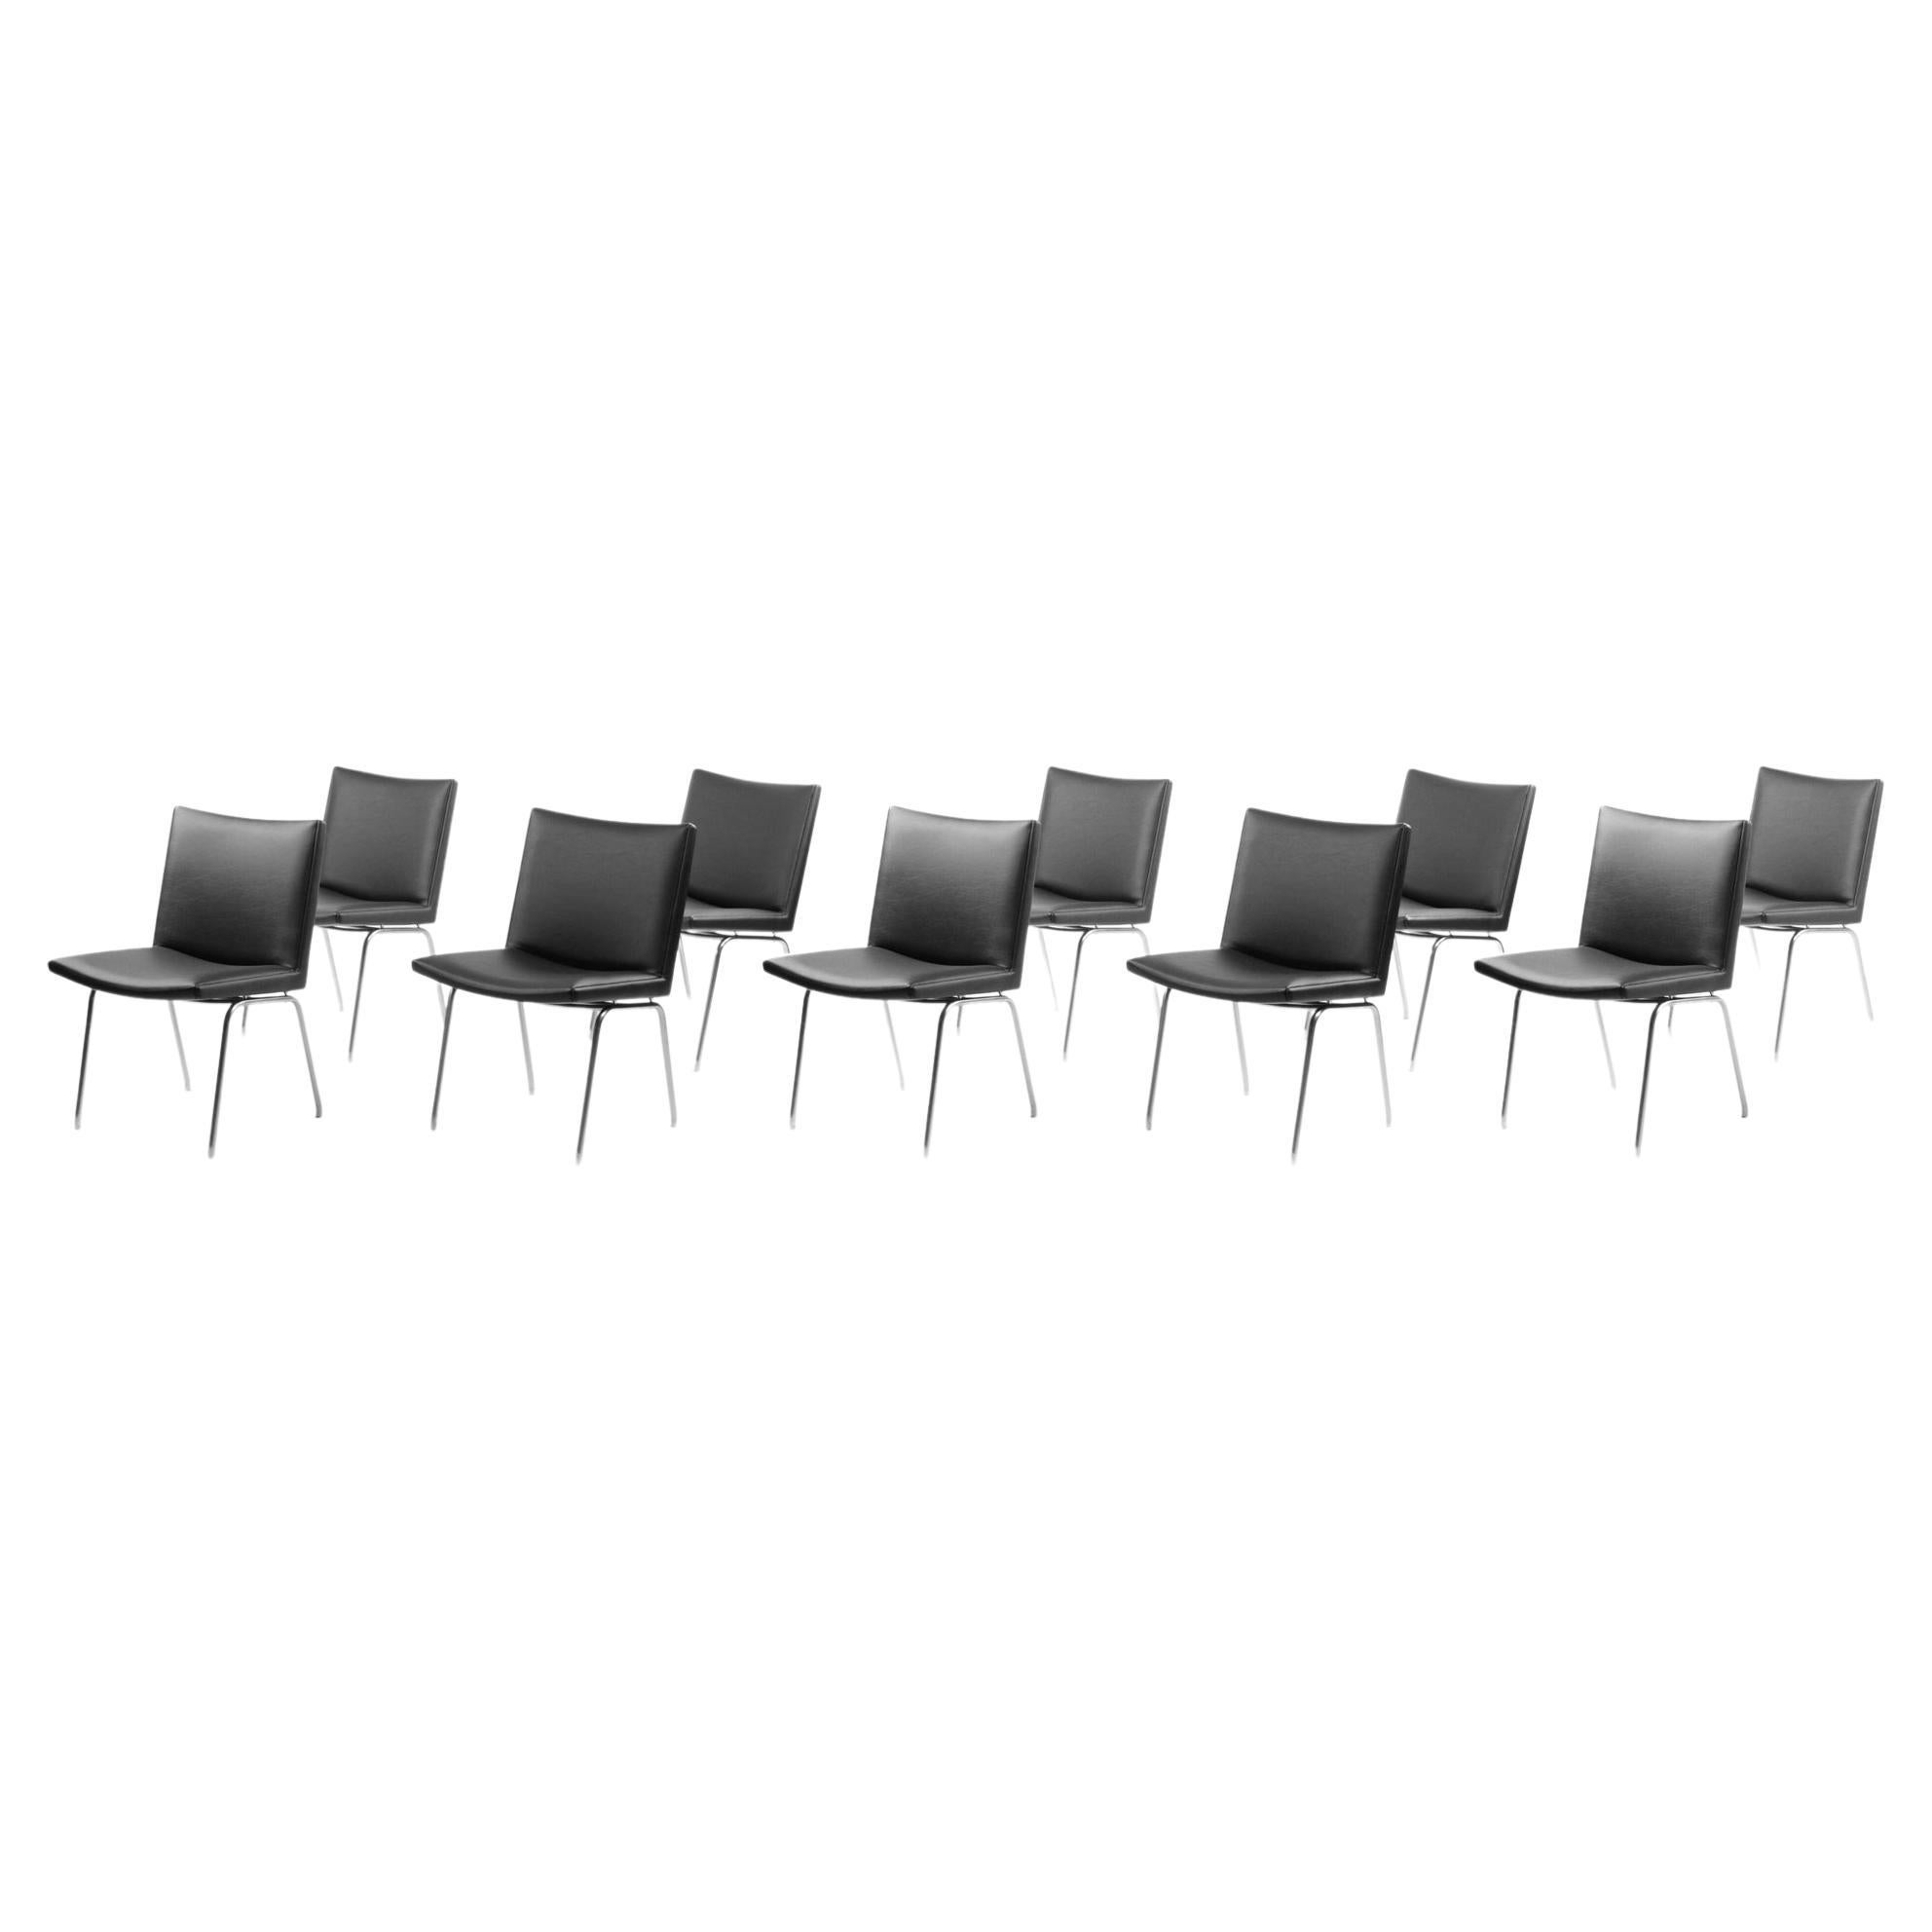 1960s Hans J. Wegner Set of 10 AP38 Airport Dining Chairs by A.P. Stolen Denmark For Sale